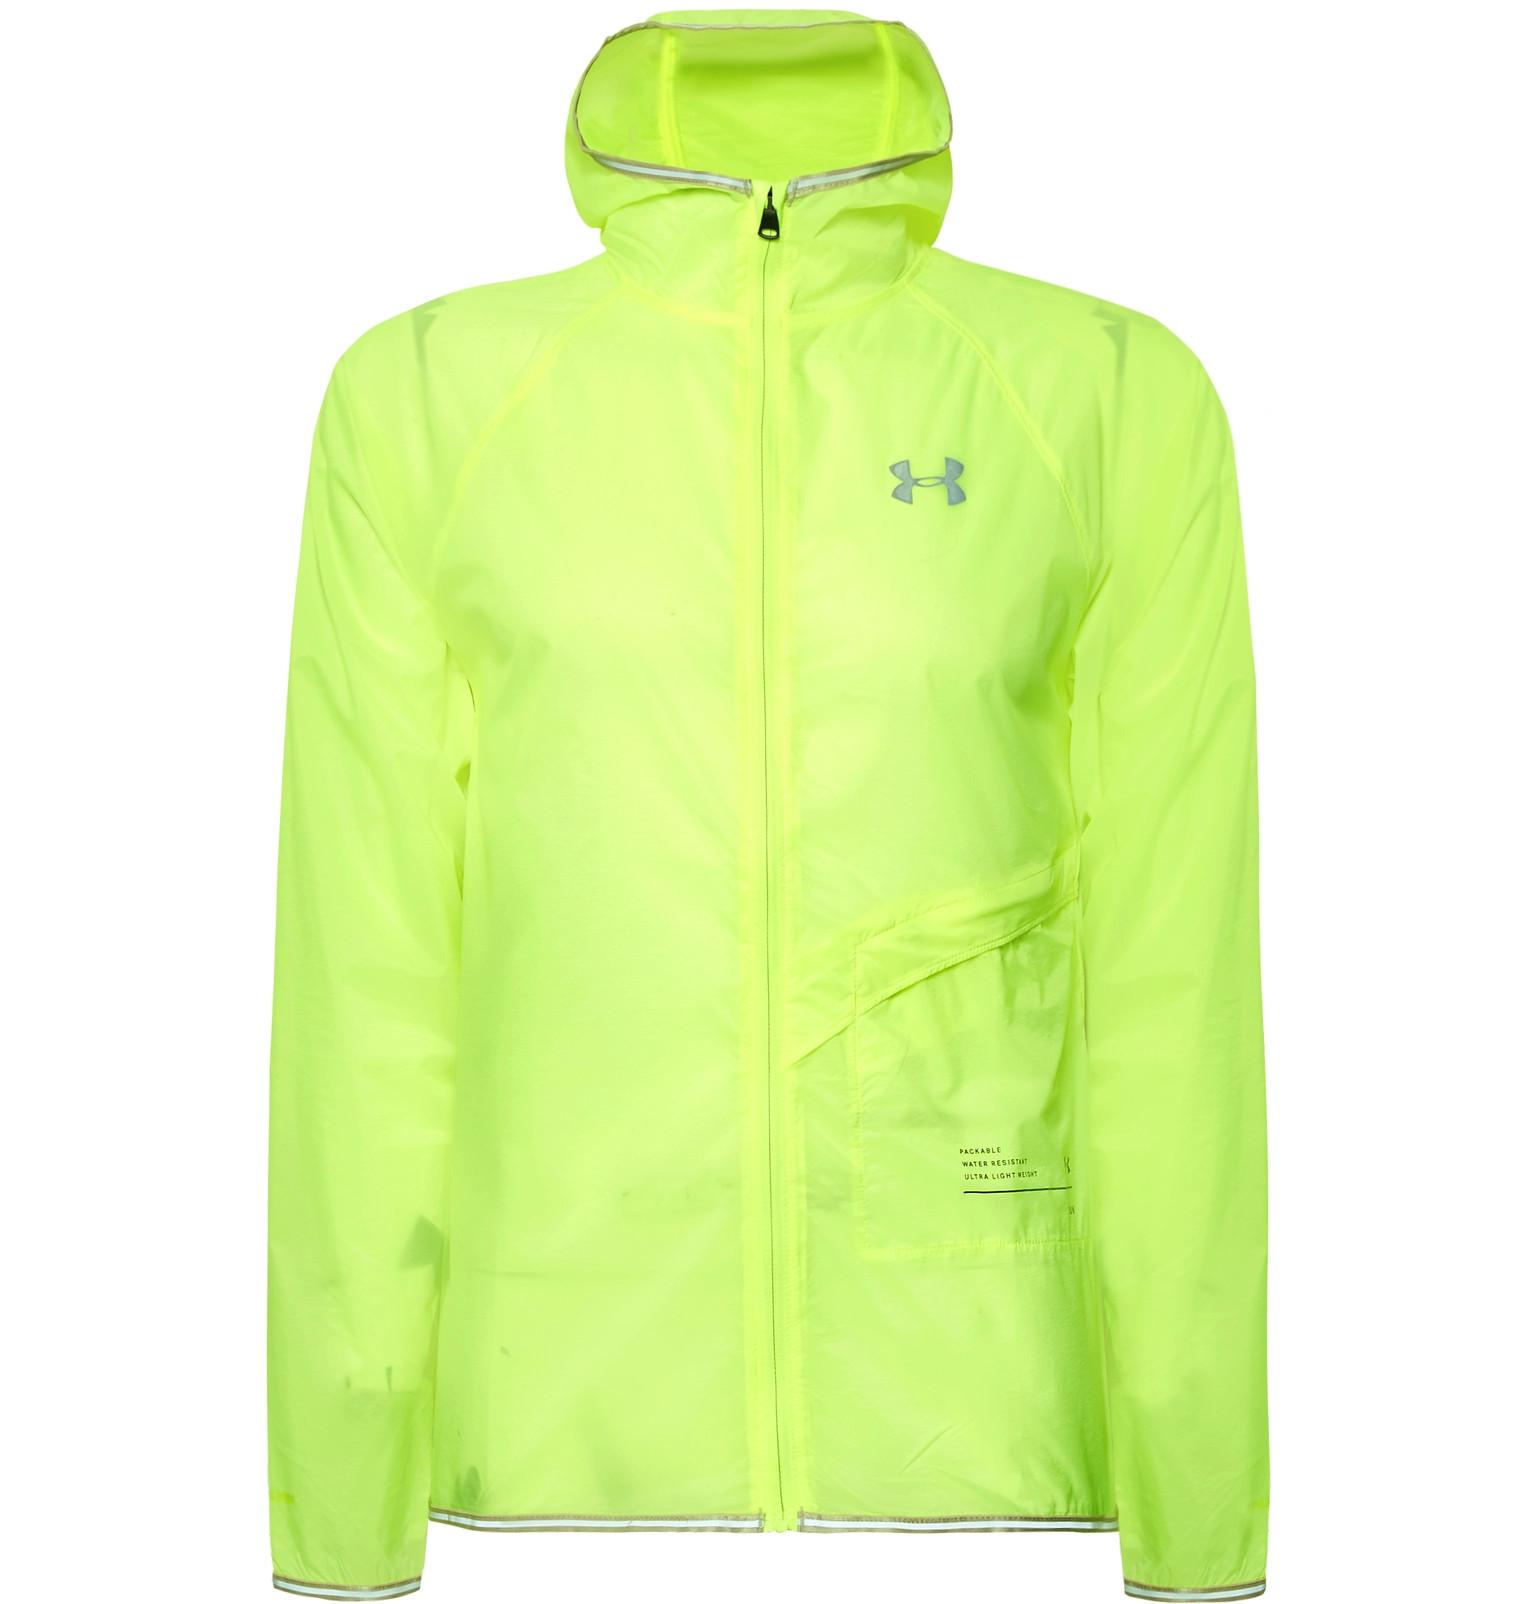 Under Armour Qualifier Packable Storm Heatgear Hooded Jacket in Bright  Yellow (Green) for Men - Lyst